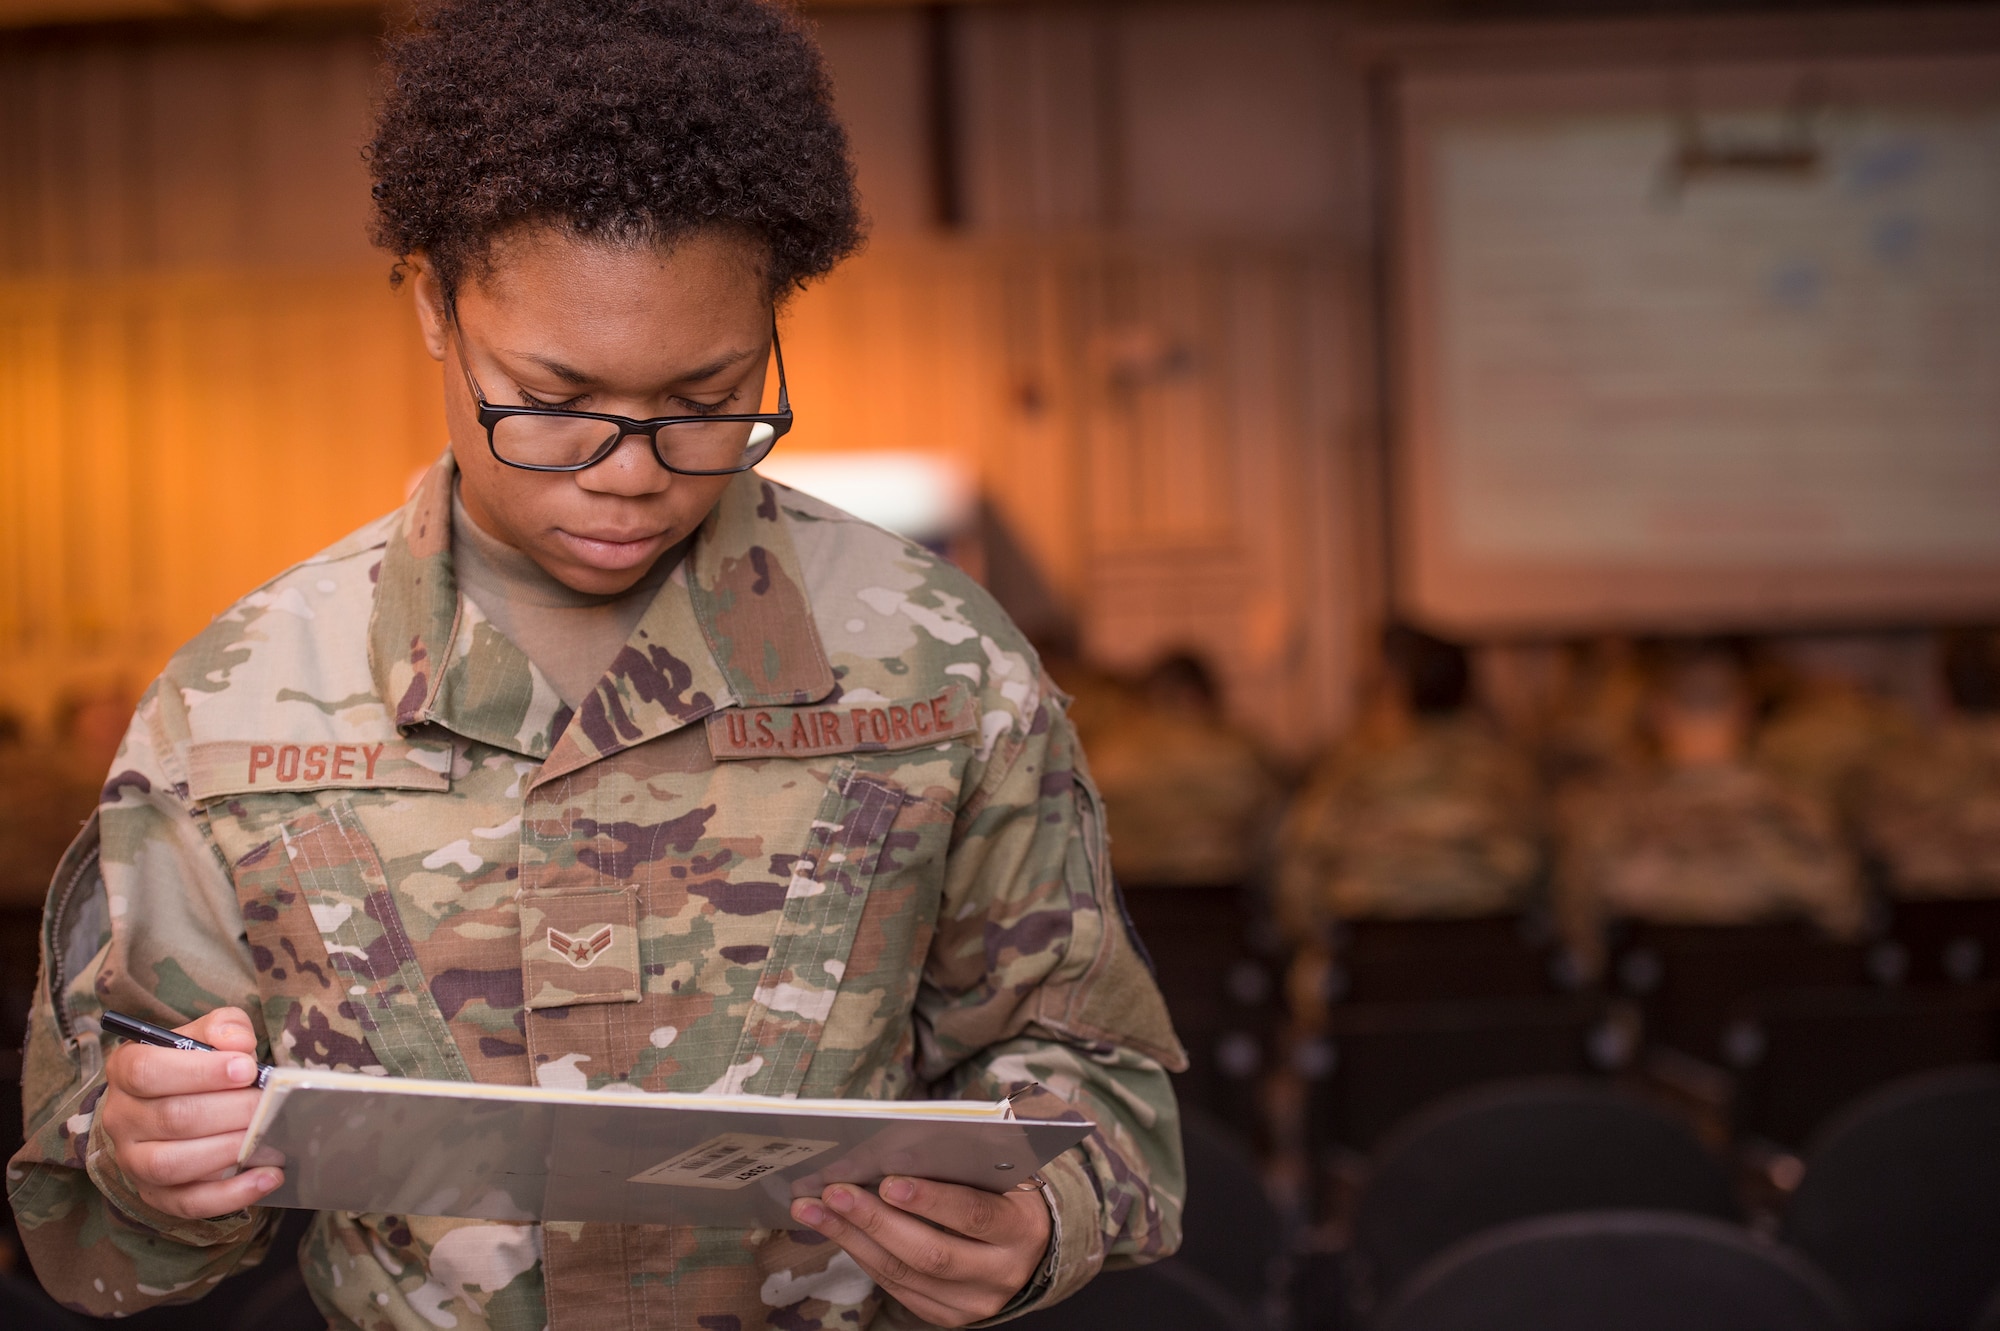 Airman 1st Class Dakaysiah Posey, 379th Expeditionary Logistics Readiness Squadron (ELRS) Air Force Transient Reception Control Center logistics planner, reviews flight information at Al Udeid Air Base, Qatar, Jan. 5, 2019. 379th ELRS log planners relay transportation information to service members traveling to deployed locations across U.S. Central Command’s area of responsibility. They provide warfighters in transition support including lodging, means of communication and vehicles to ensure mission effectiveness as they wait for forward deployment.  (U.S. Air Force photo by Tech. Sgt. Christopher Hubenthal)